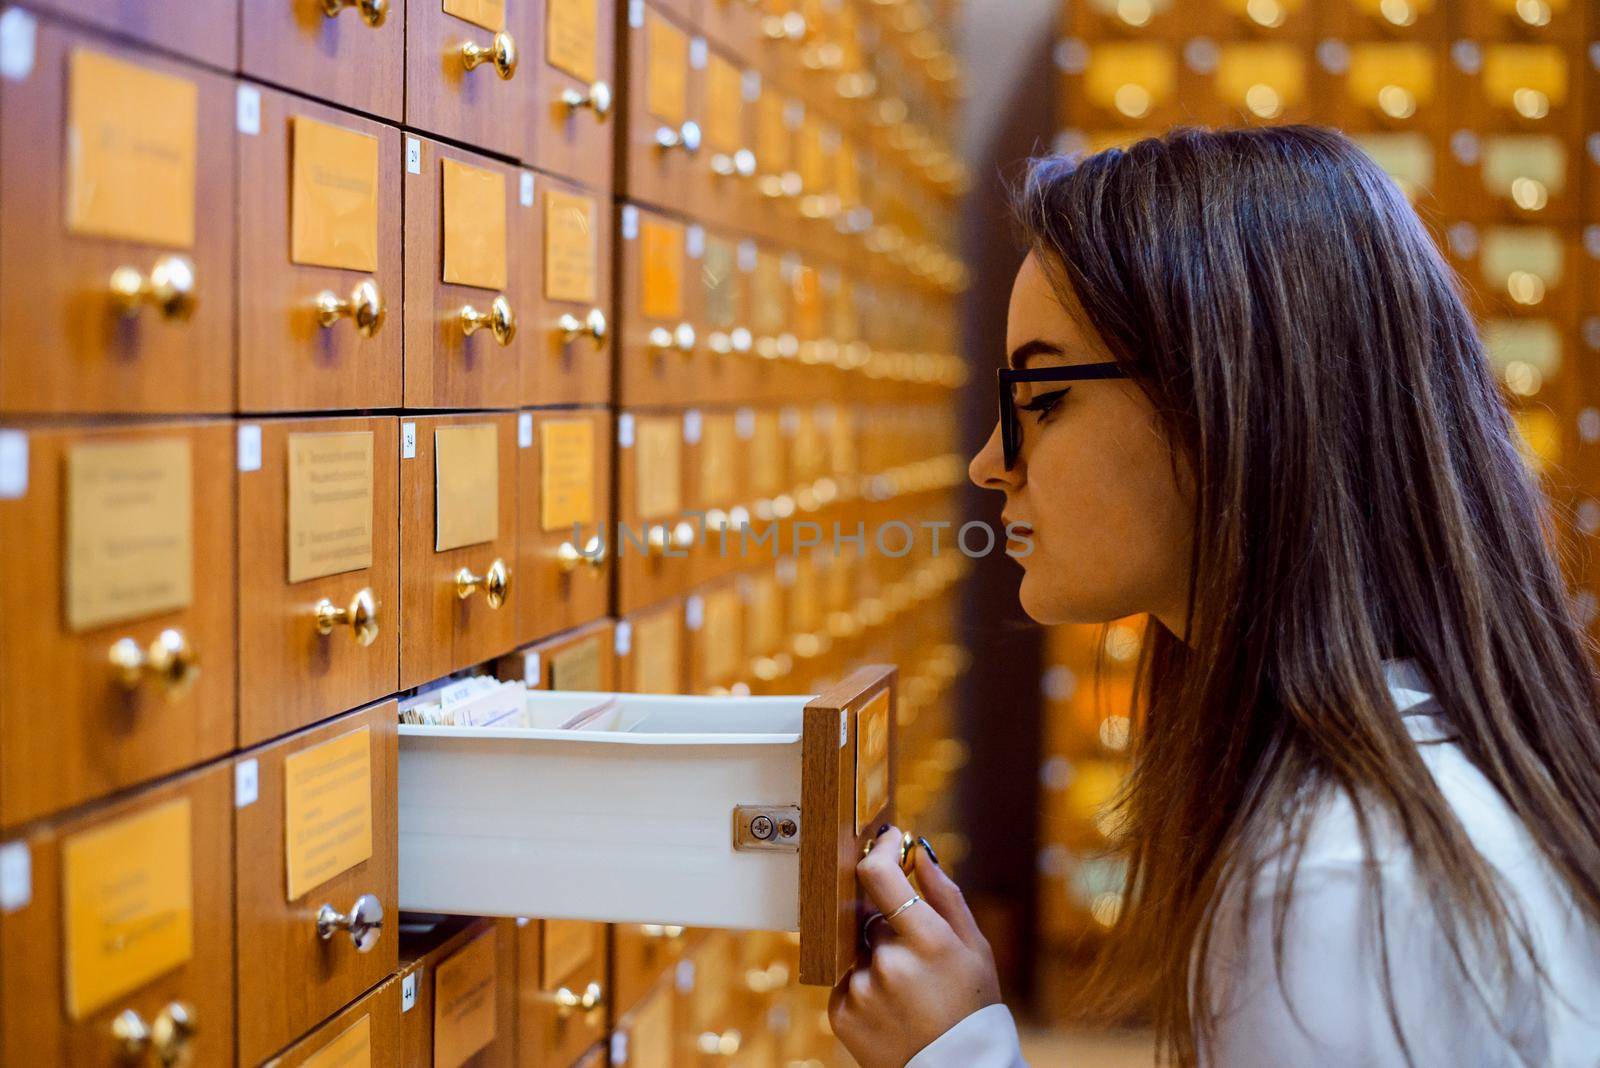 Library or archive reference card catalog. Student girl trying to find necessary book using library paper database